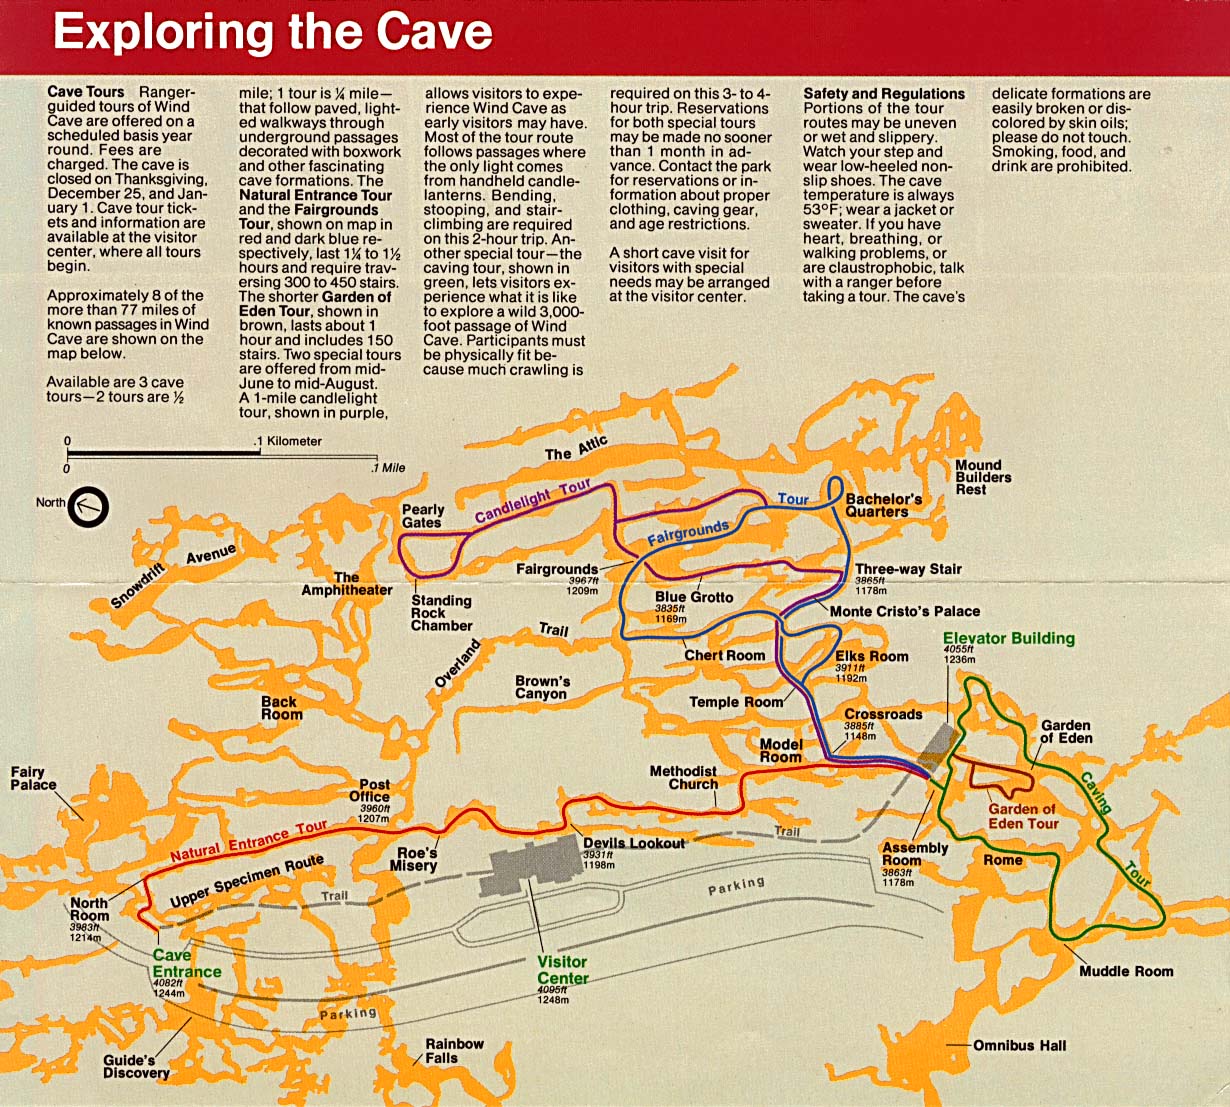  Maps of United States National Parks, Monuments and Historic Sites Wind Cave National Park [South Dakota] (Schematic Cave Map) 1996 (351K) 